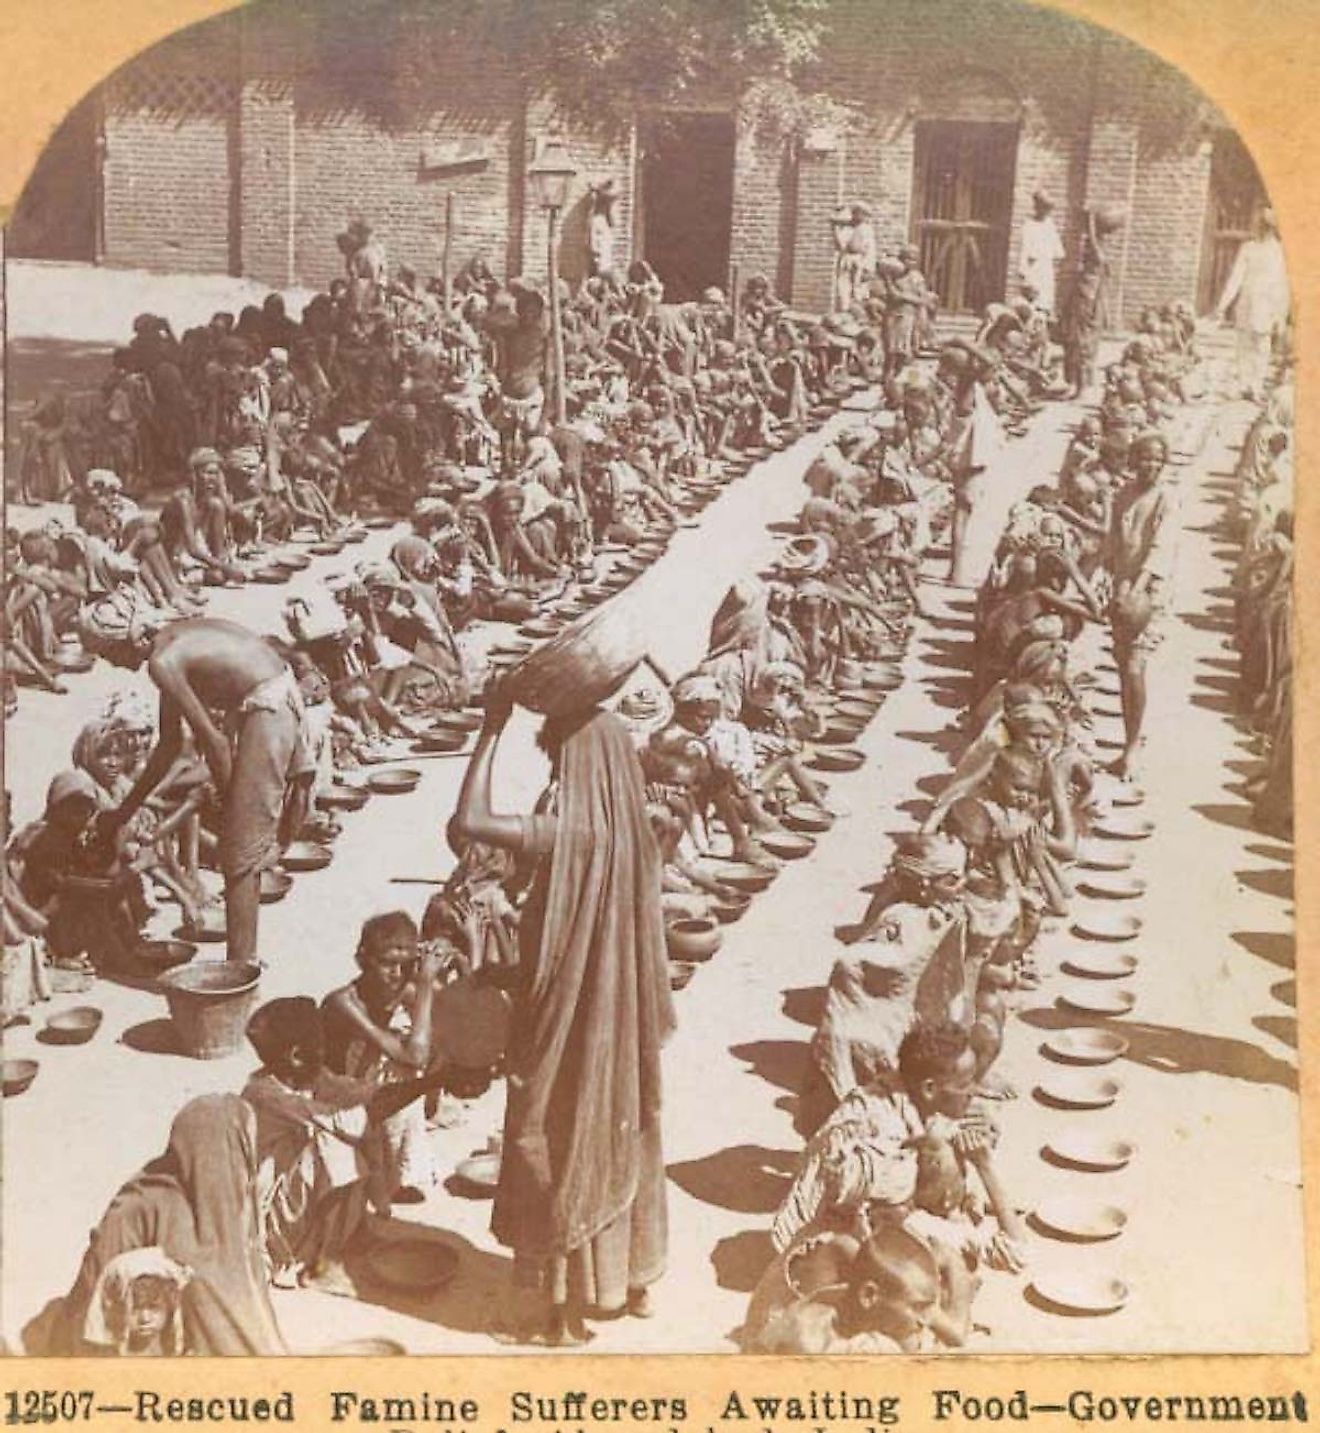 Government famine relief, c. 1901, Ahmedabad